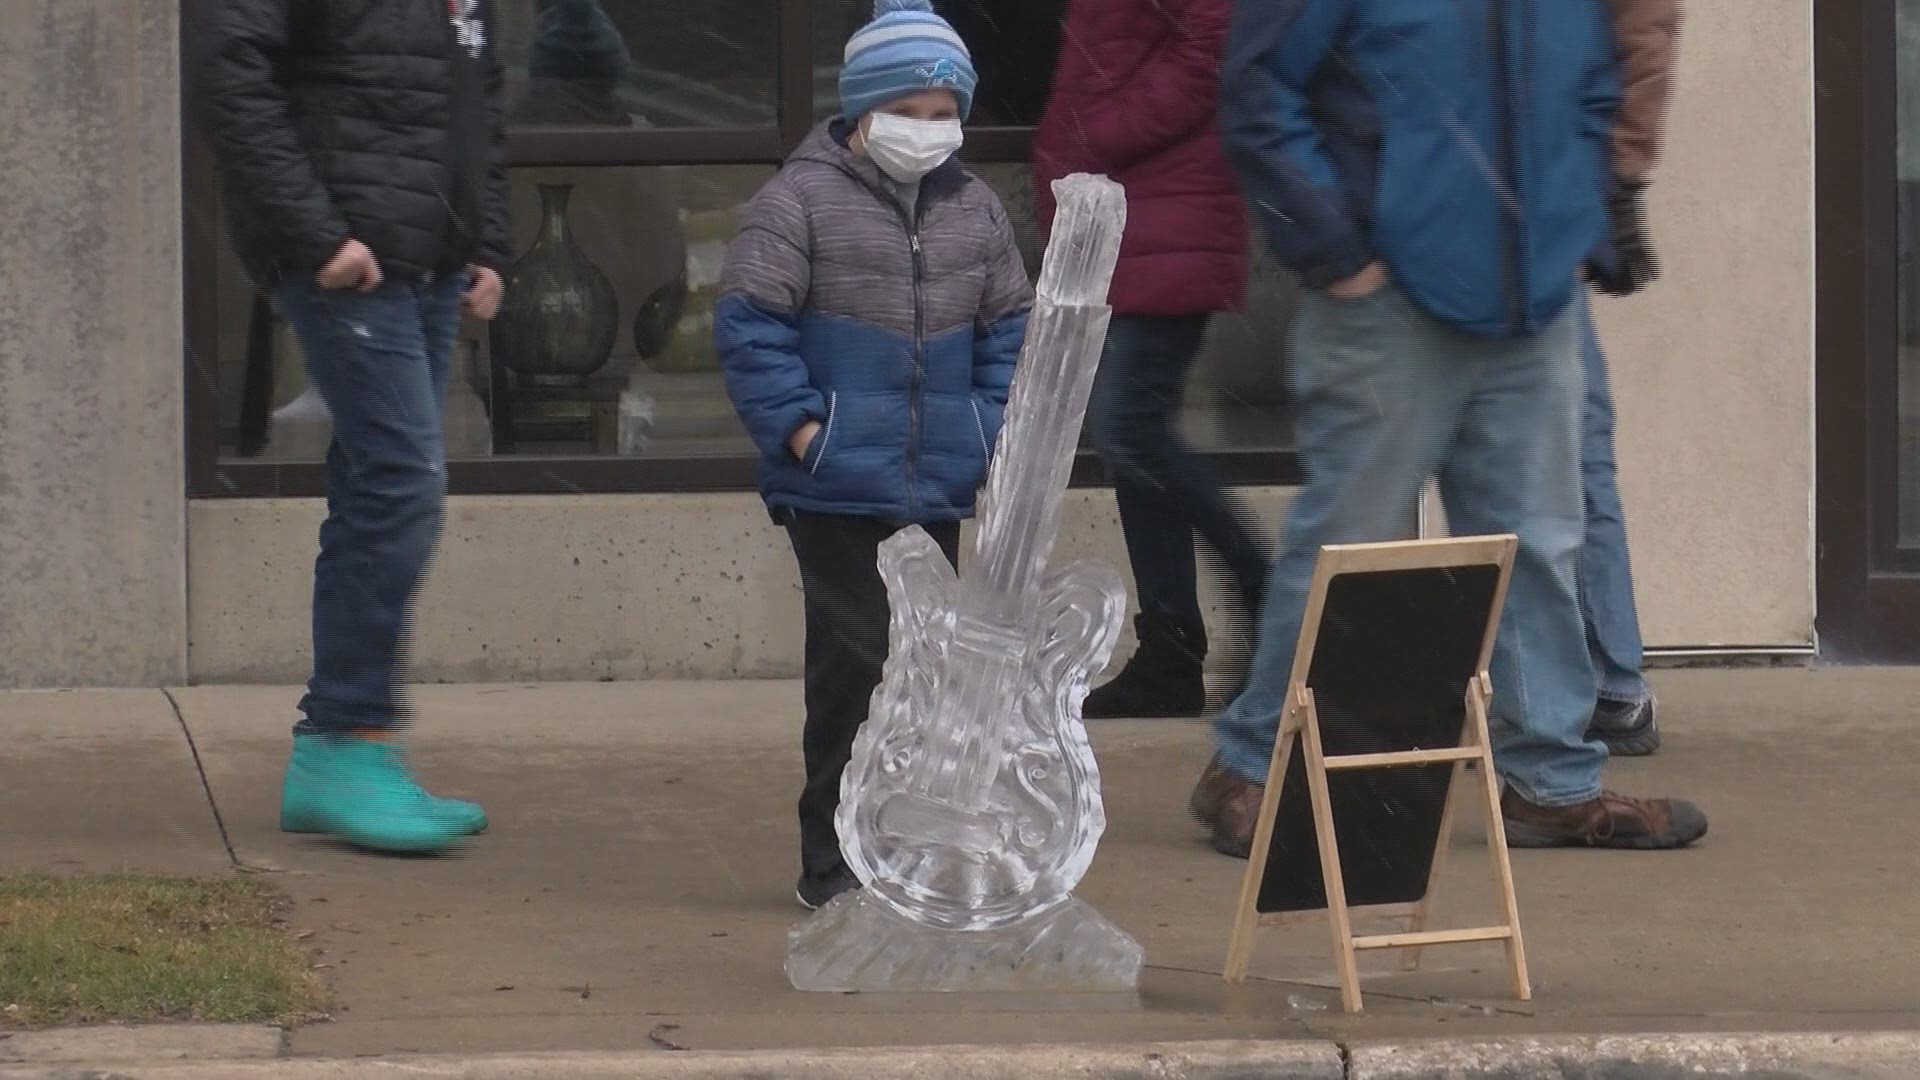 Tecumseh's 12th annual Ice Sculpture Festival wrapped up on Sunday and COVID-19 was not going to freeze their plans.